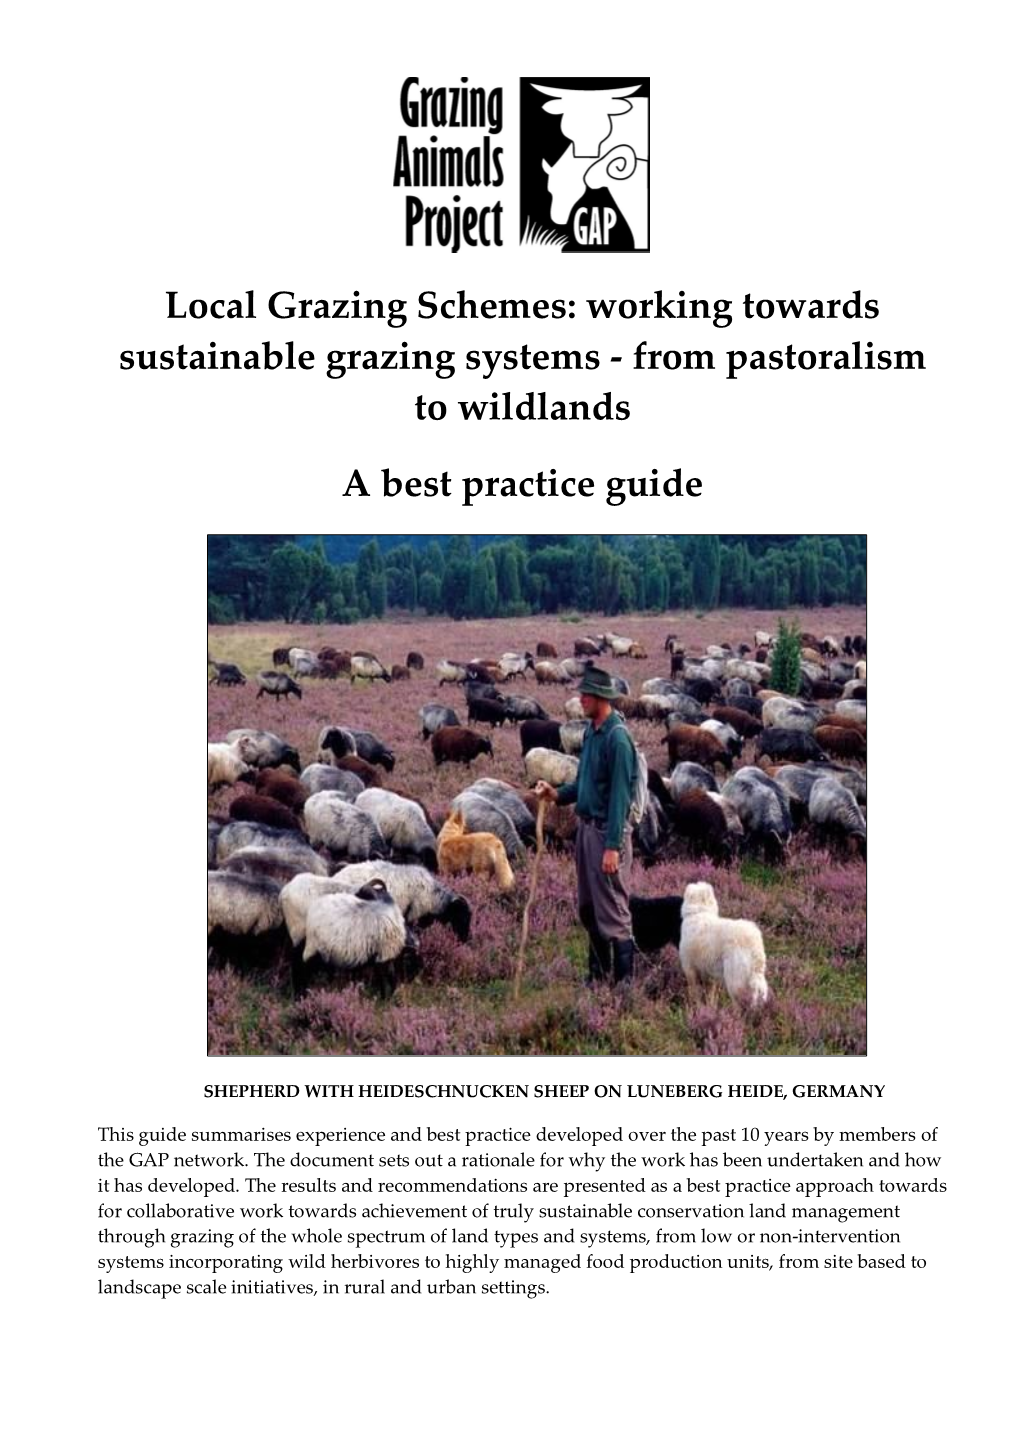 Local Grazing Schemes: Working Towards Sustainable Grazing Systems - from Pastoralism to Wildlands